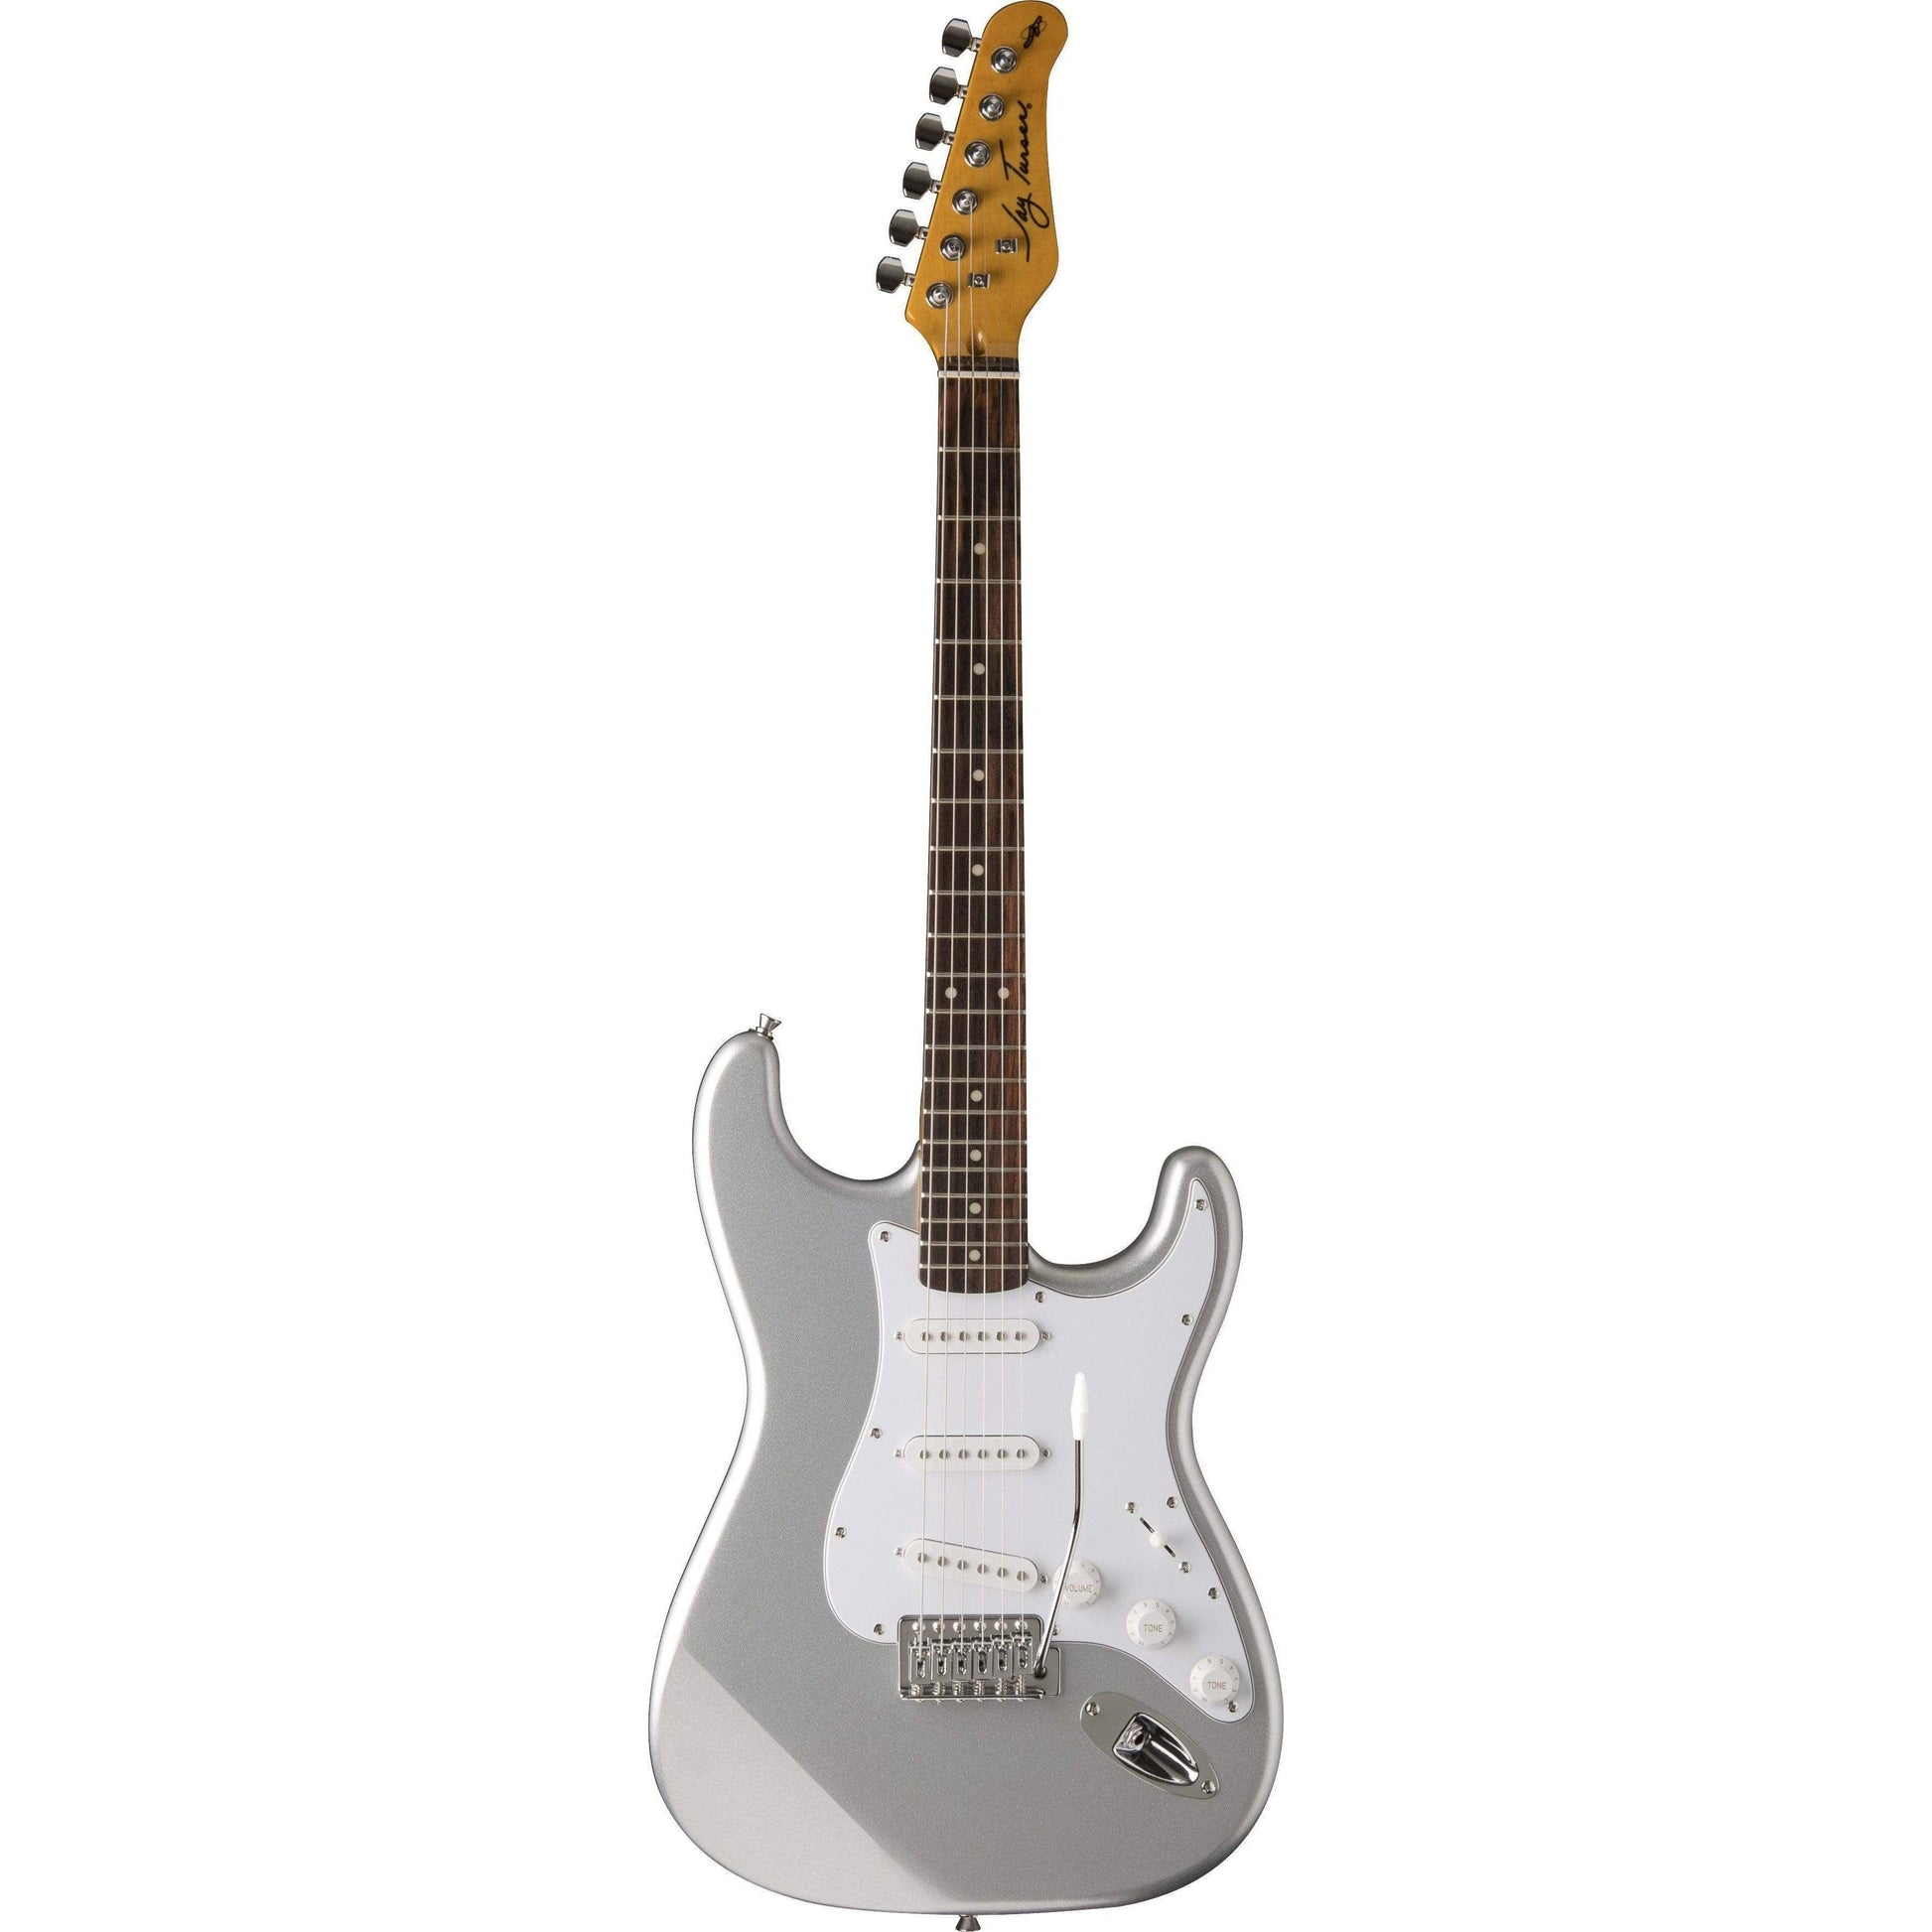 Jay Turser JT300CRS Electric Guitar - Chrome silver